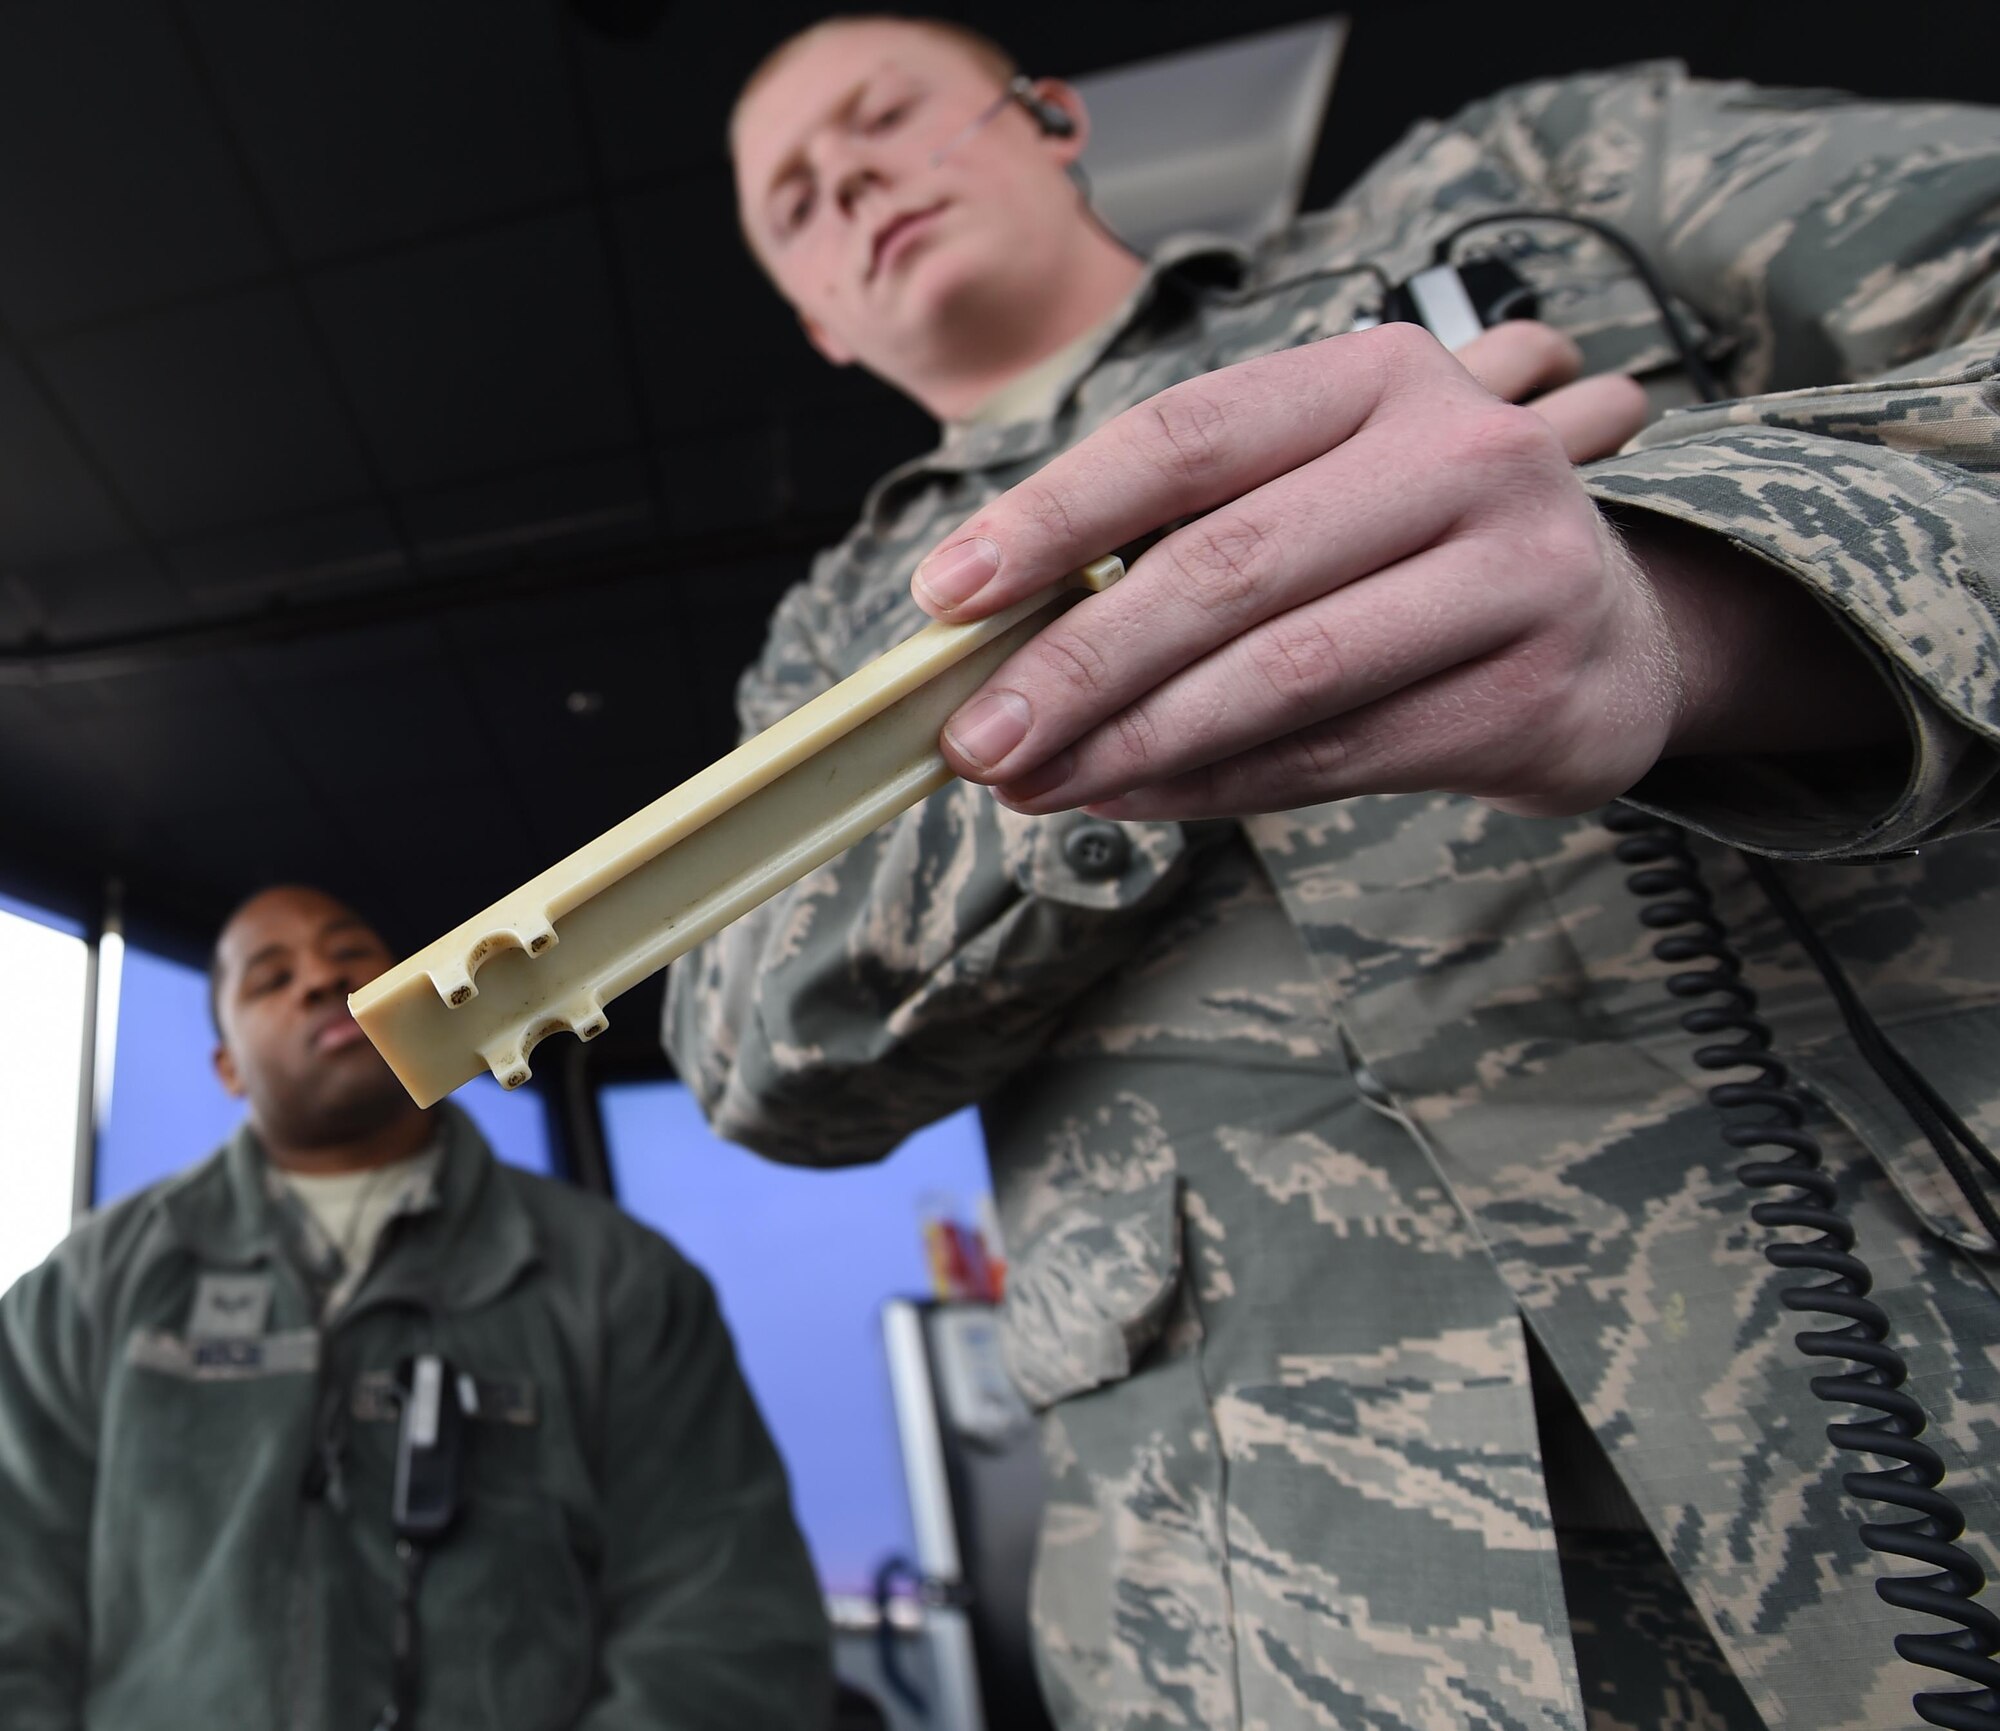 U.S. Air Force Senior Airman Chino Ross, left, and Senior Airman Patrick Taylor, 1st Operations Support Squadron air traffic controllers, review a flight strip at Joint Base Langley-Eustis, Va., Dec. 16, 2016. Flight strip information is sent from either Langley Air Force Base operations or the Norfolk Radar Center. (U.S. Air Force photo by Staff Sgt. Natasha Stannard)